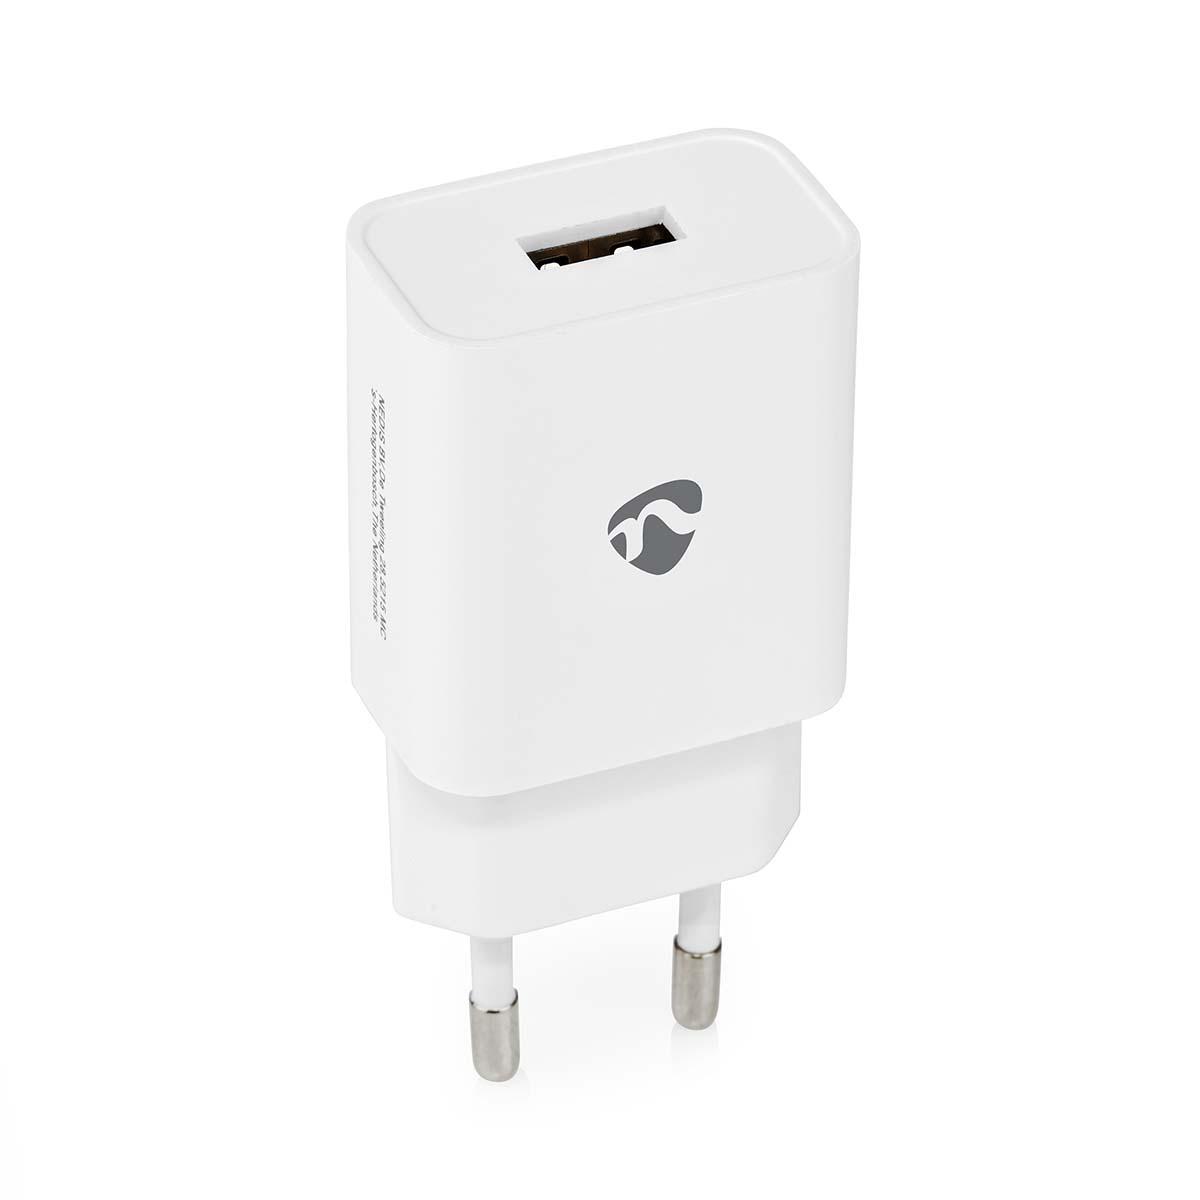 Chargeur usb rapide 5v 2.1a 10.50w